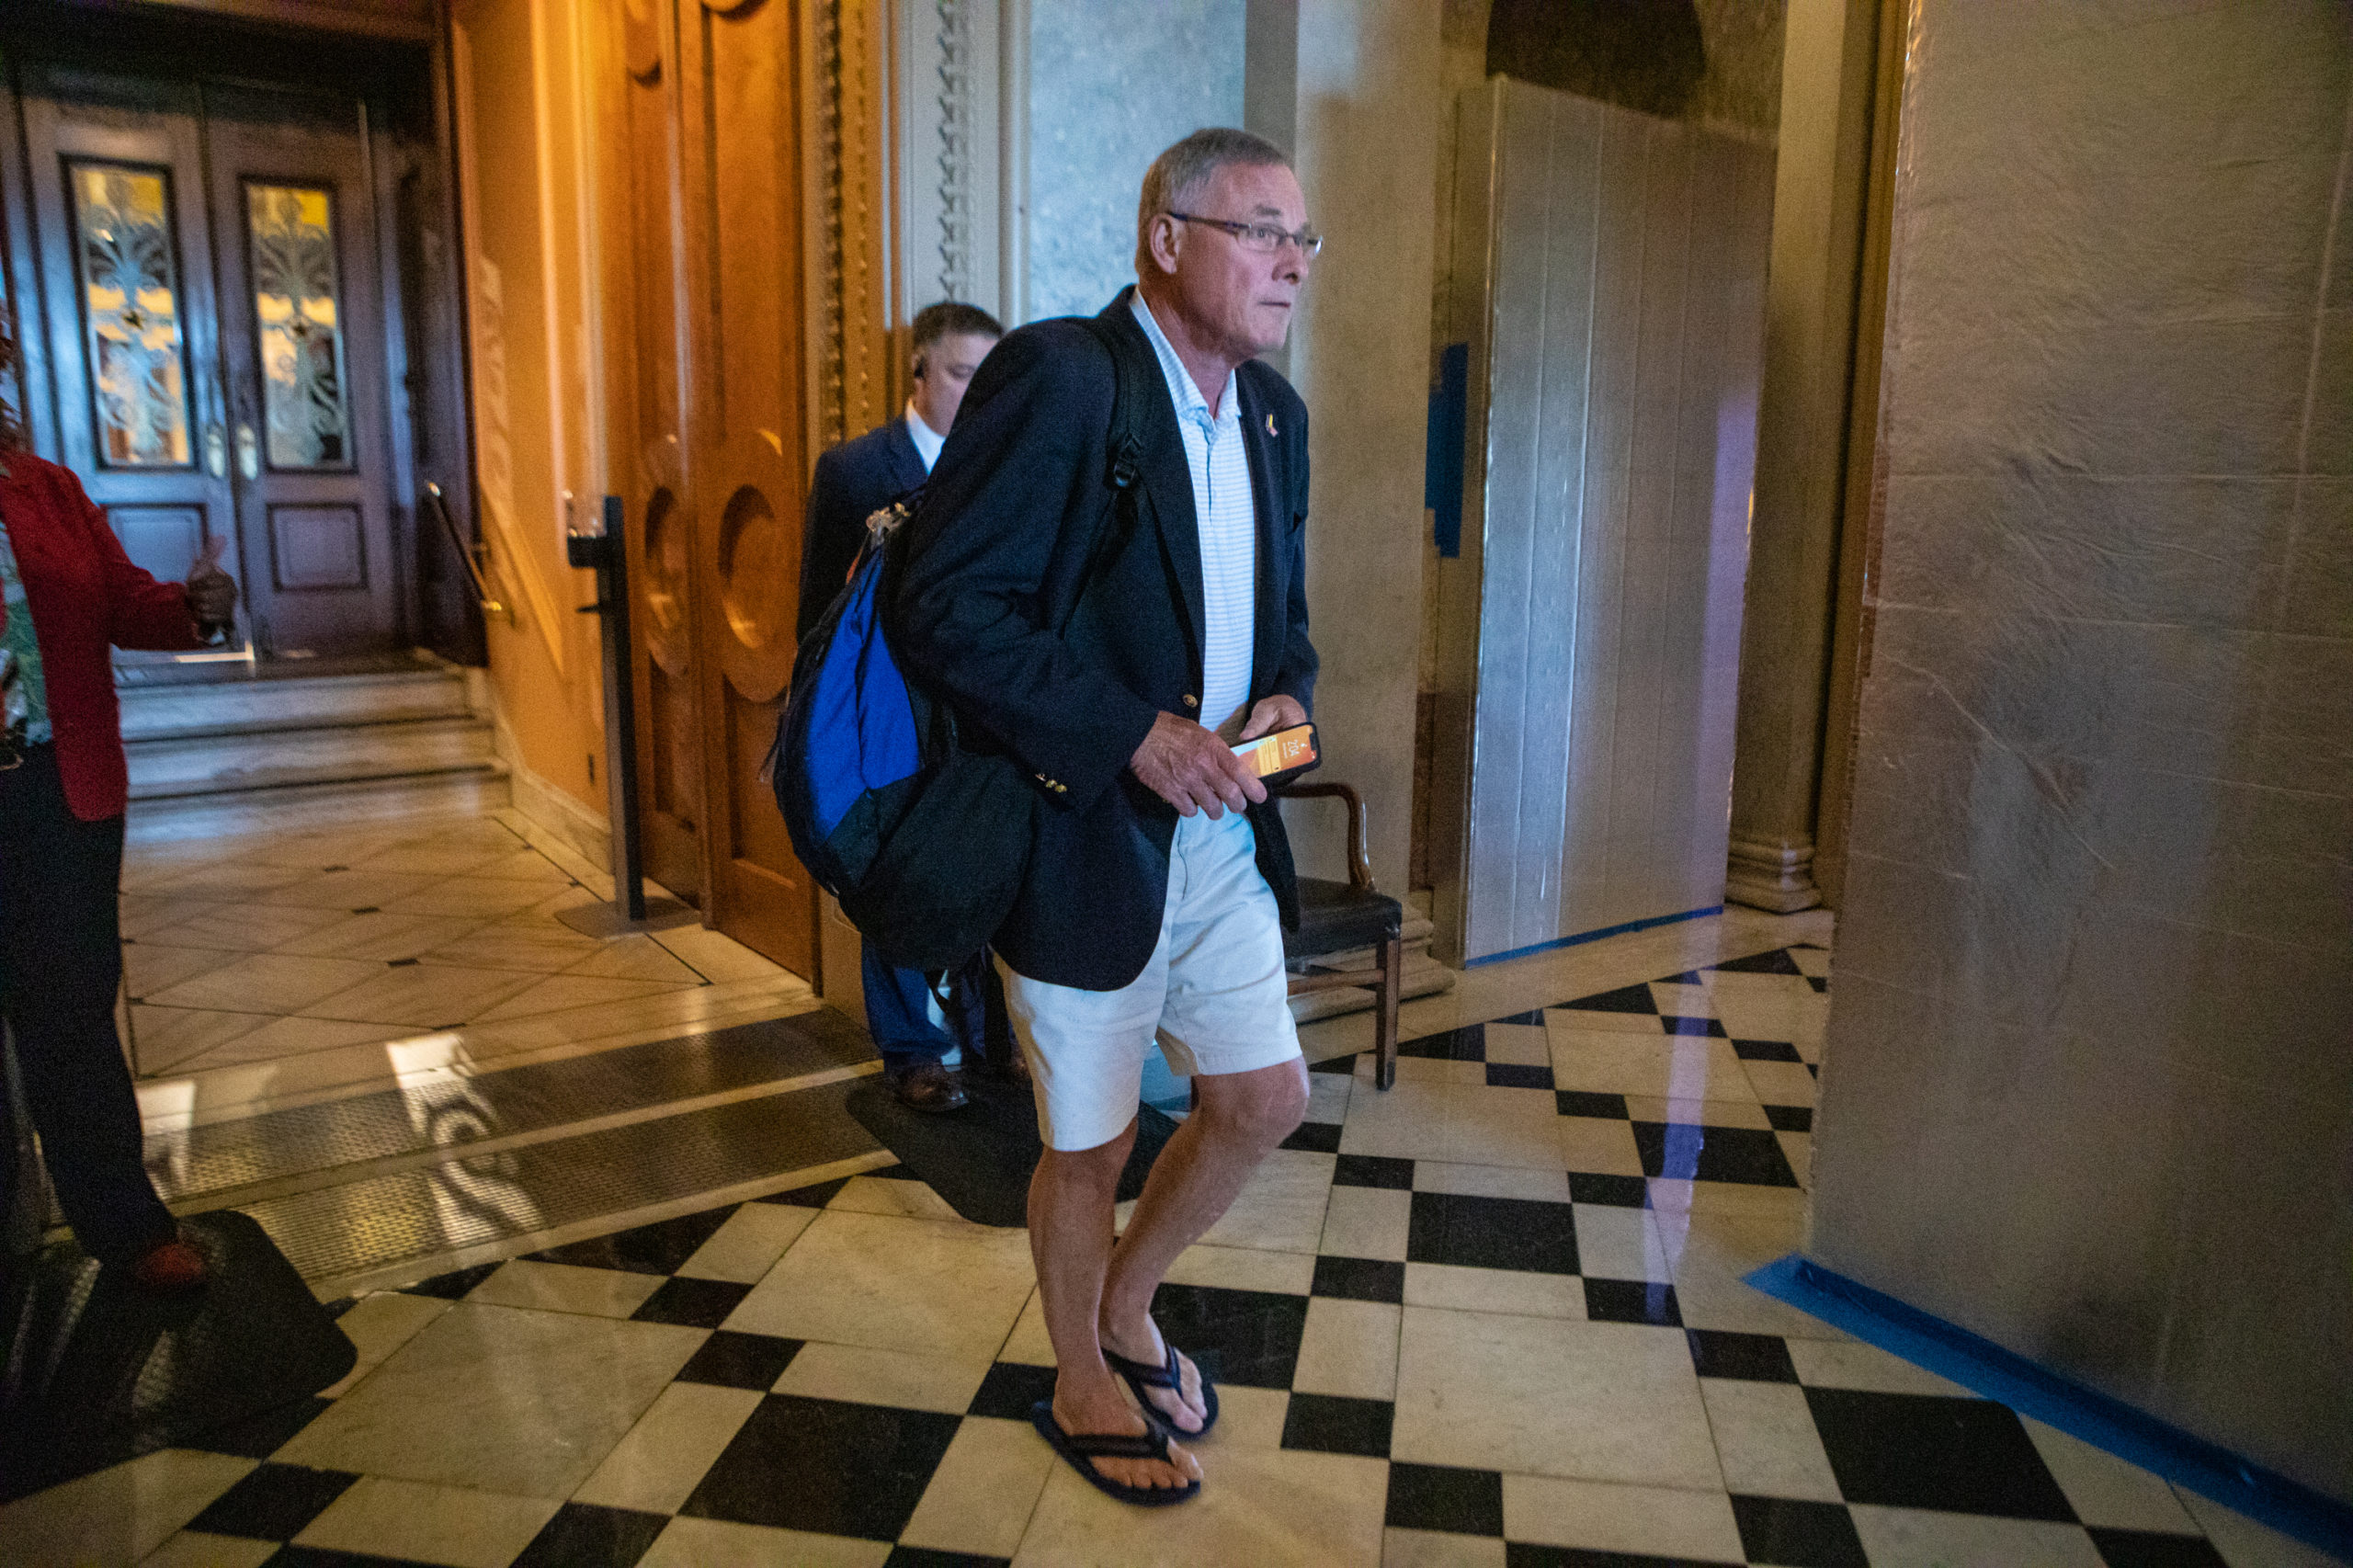 WASHINGTON, DC - AUGUST 6: Sen. Richard Burr (R-N.C.) departs the Senate floor following a vote on Capitol Hill on August 6, 2022 in Washington, DC. The U.S. Senate plans to work through the weekend to vote on amendments to the Inflation Reduction Act, expected to conclude on Sunday, August 7, 2022. (Photo by Anna Rose Layden/Getty Images)